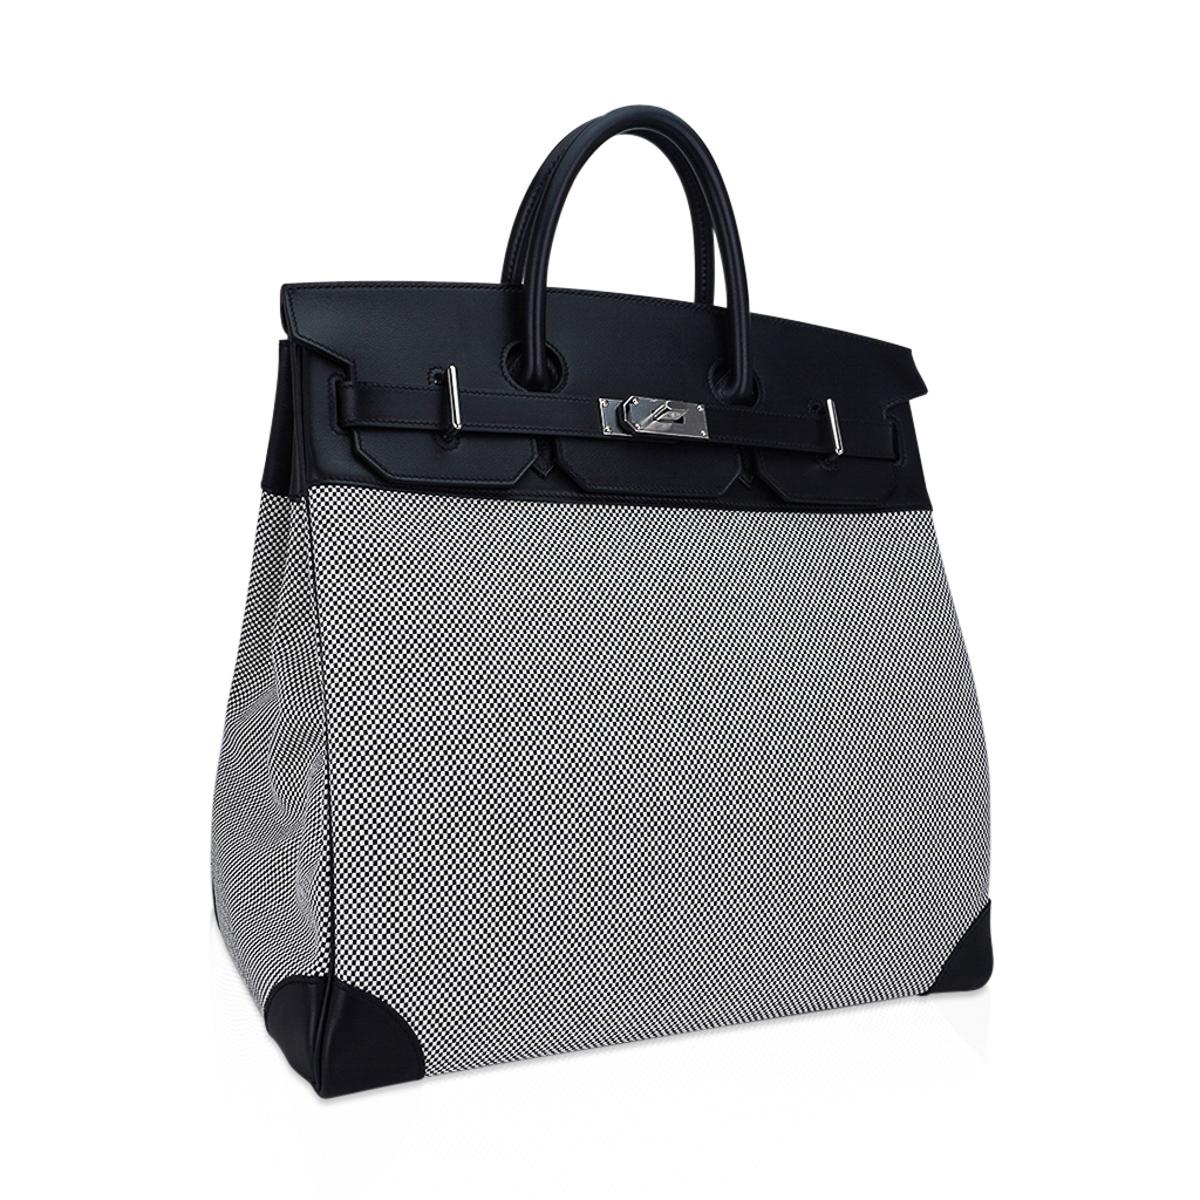 Mightychic offers a rare Hermes HAC 40 bag featured in Black with crisp Black and White Criss Cross Toile. Black Black Evercolor leather is accentuated with palladium hardware.
A chic and masculine combination for this rare Hermes classic bag.
This